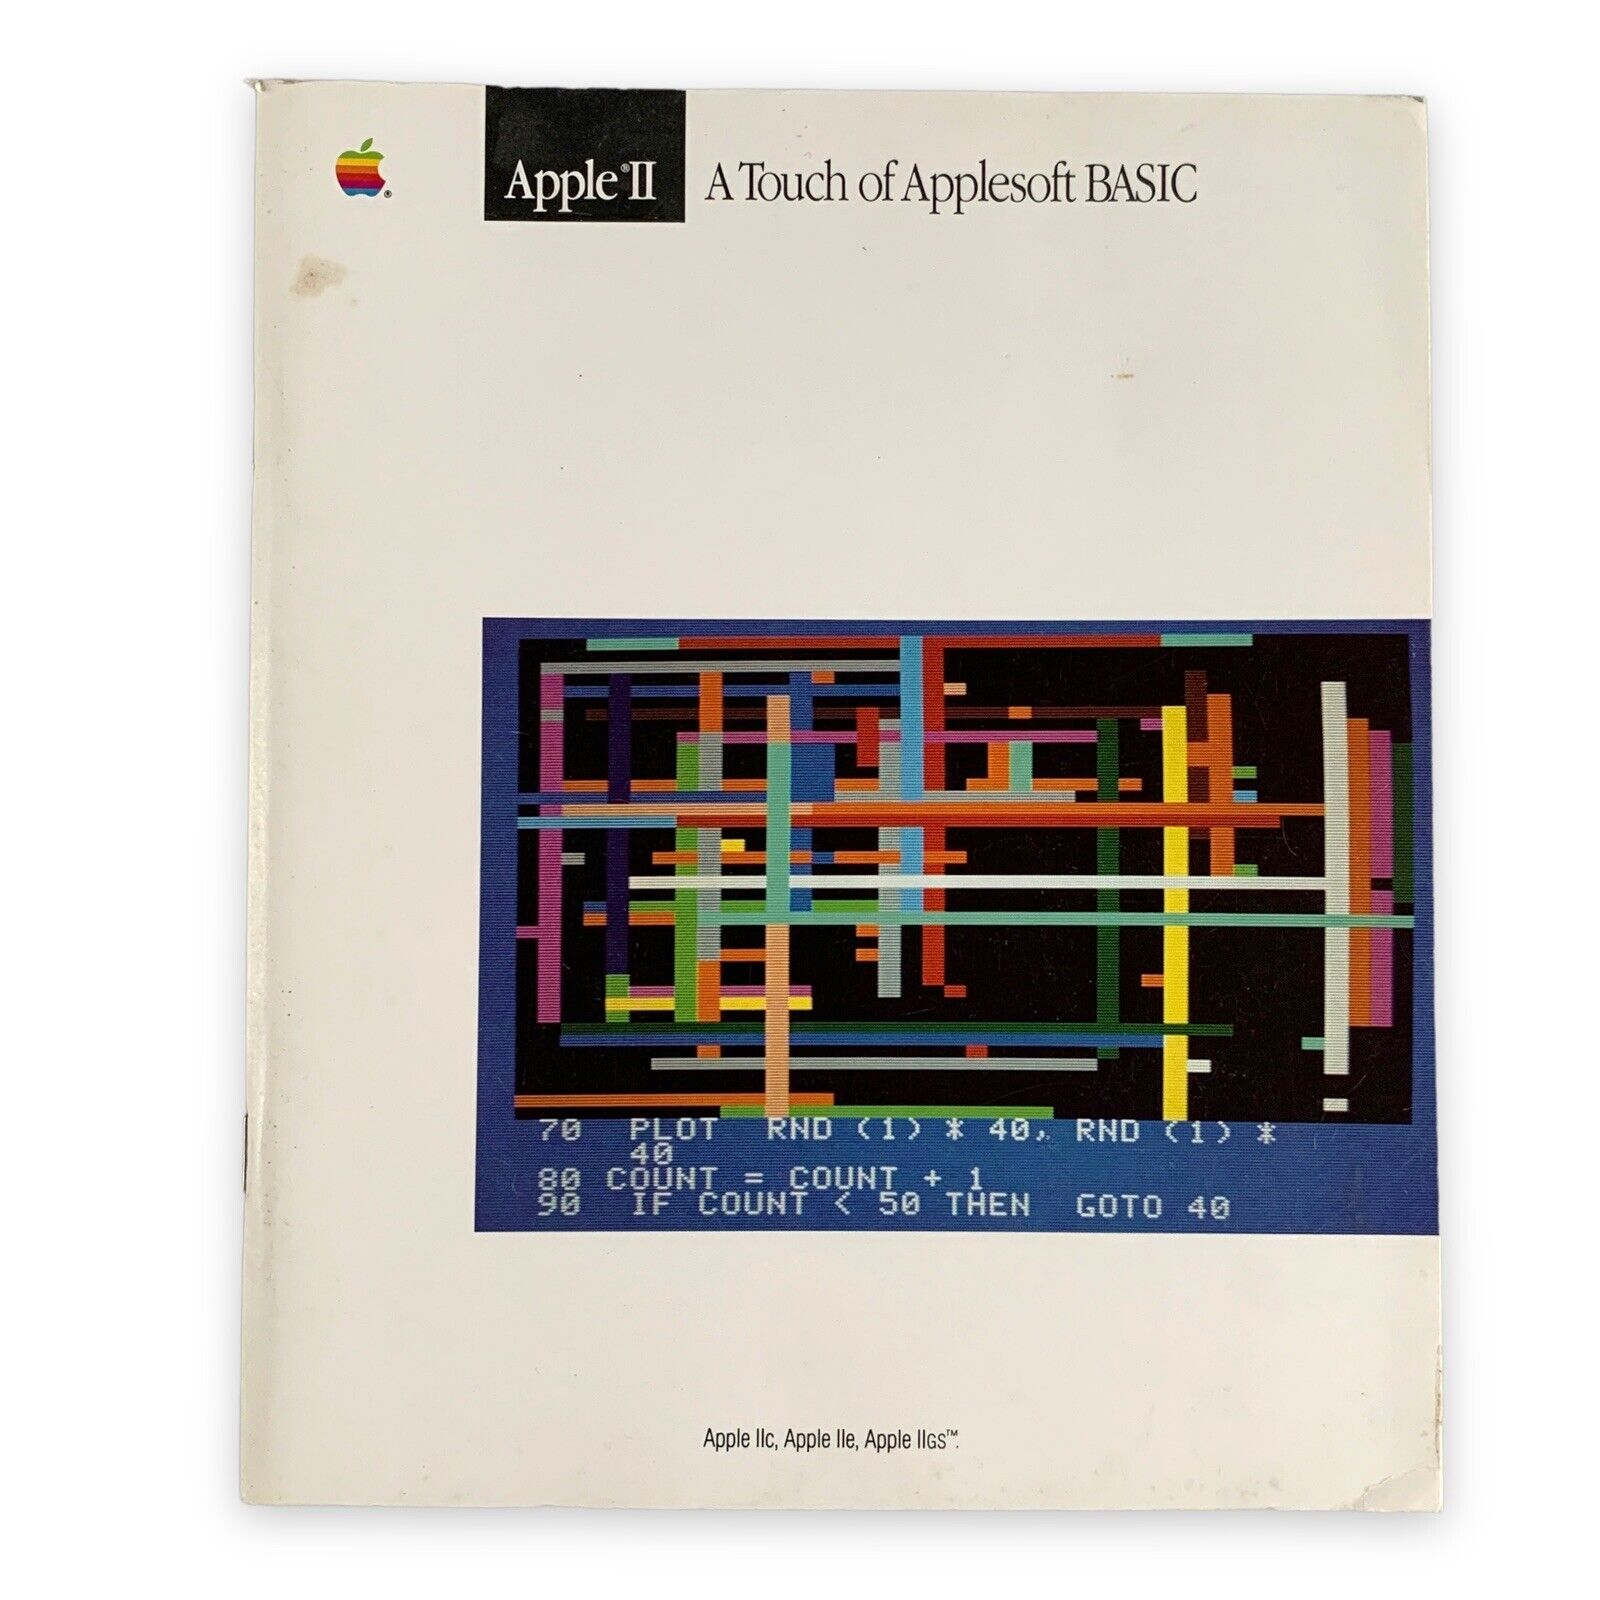 VTG 1986 Apple II A touch of AppleSoft BASIC Tutorial Manual